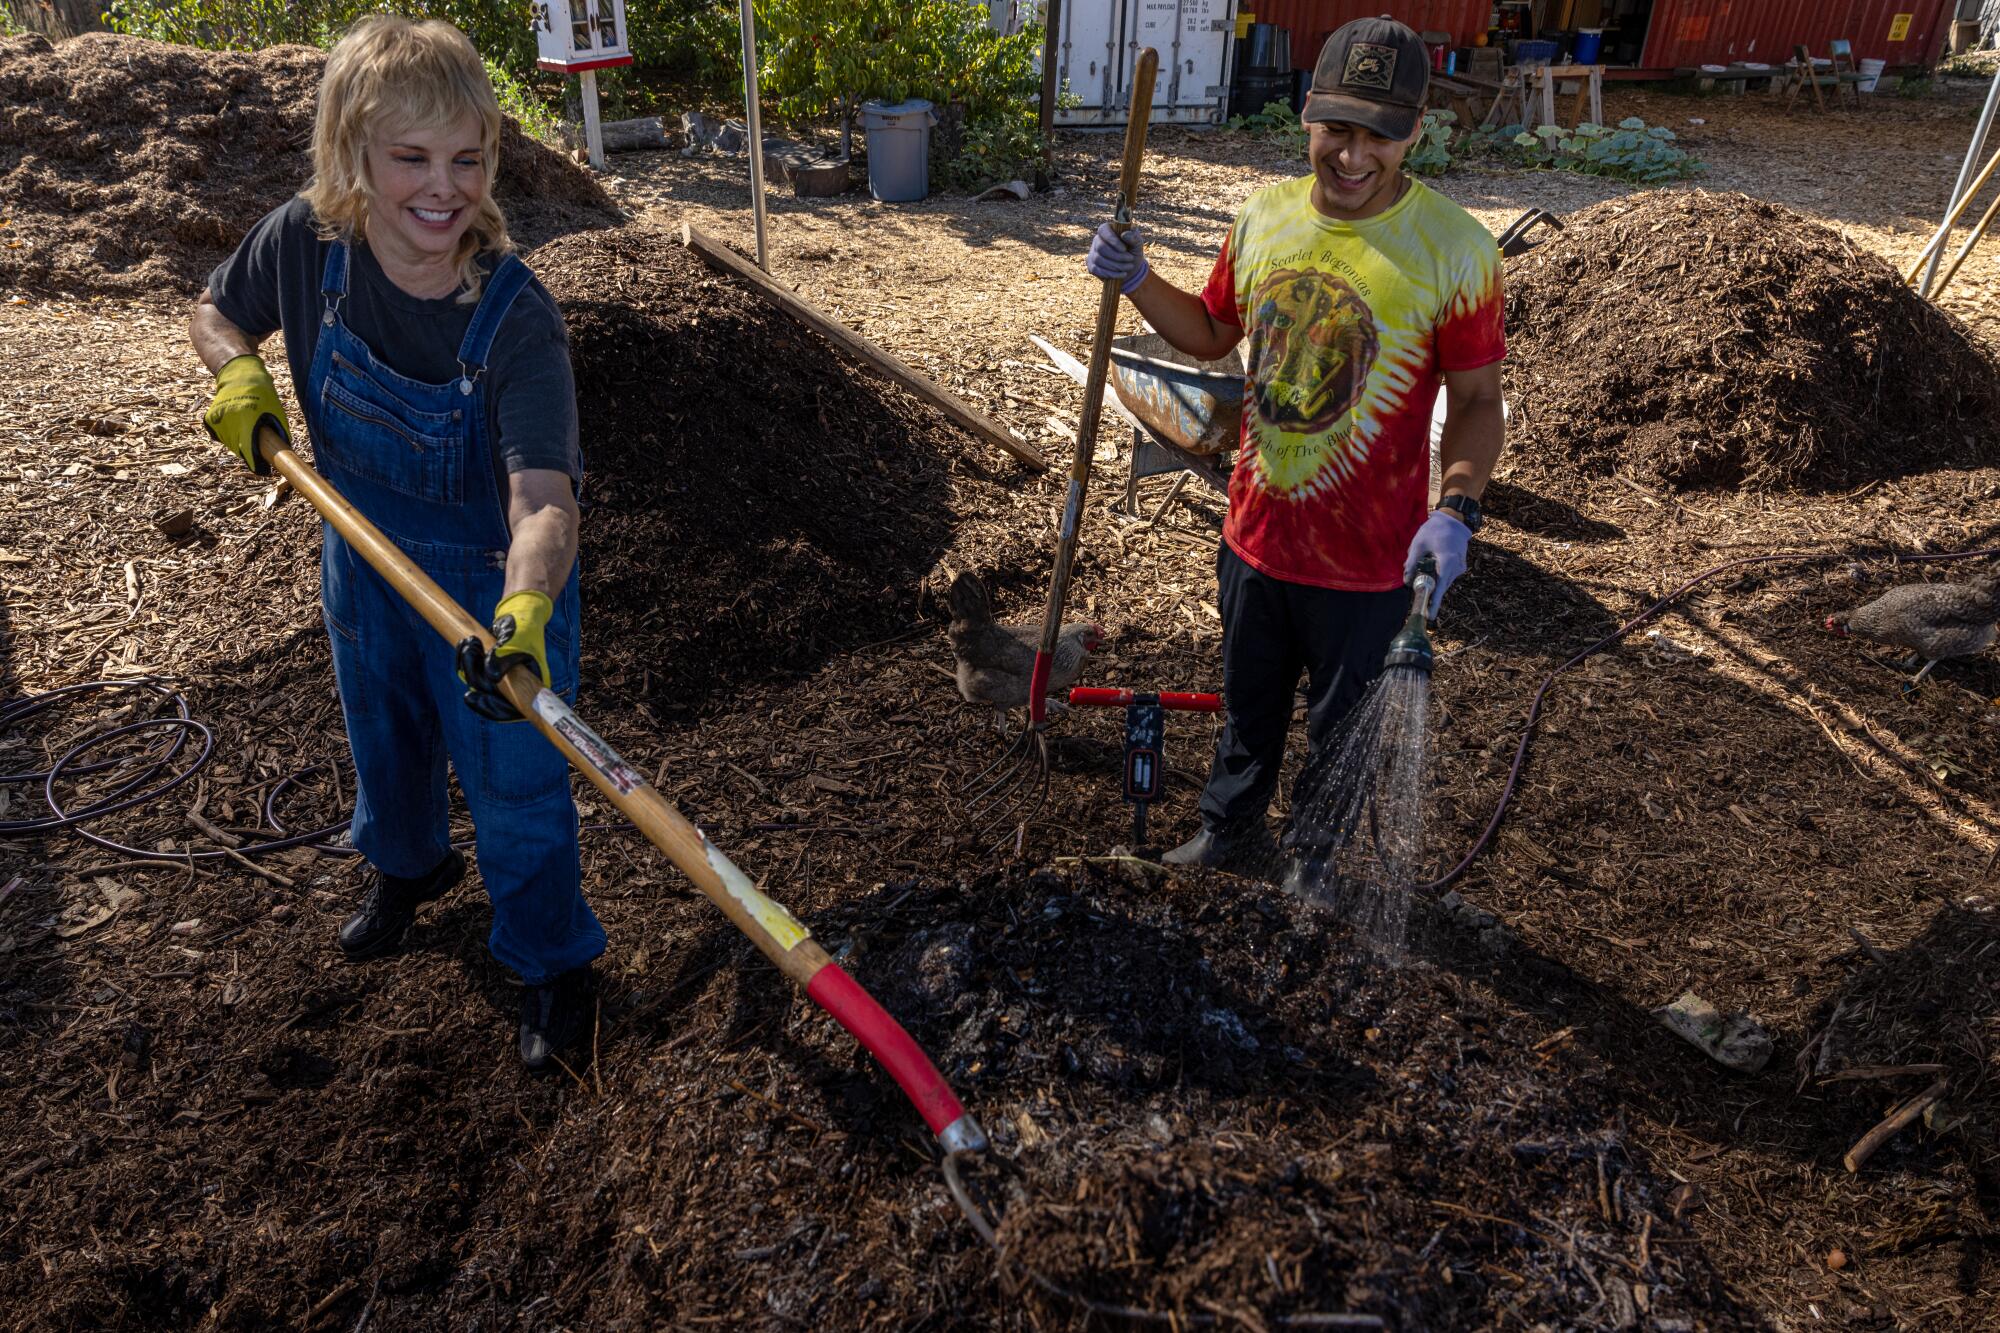 A person uses a garden forks to turn a pile of compost while another person waters the brown soil with a hose